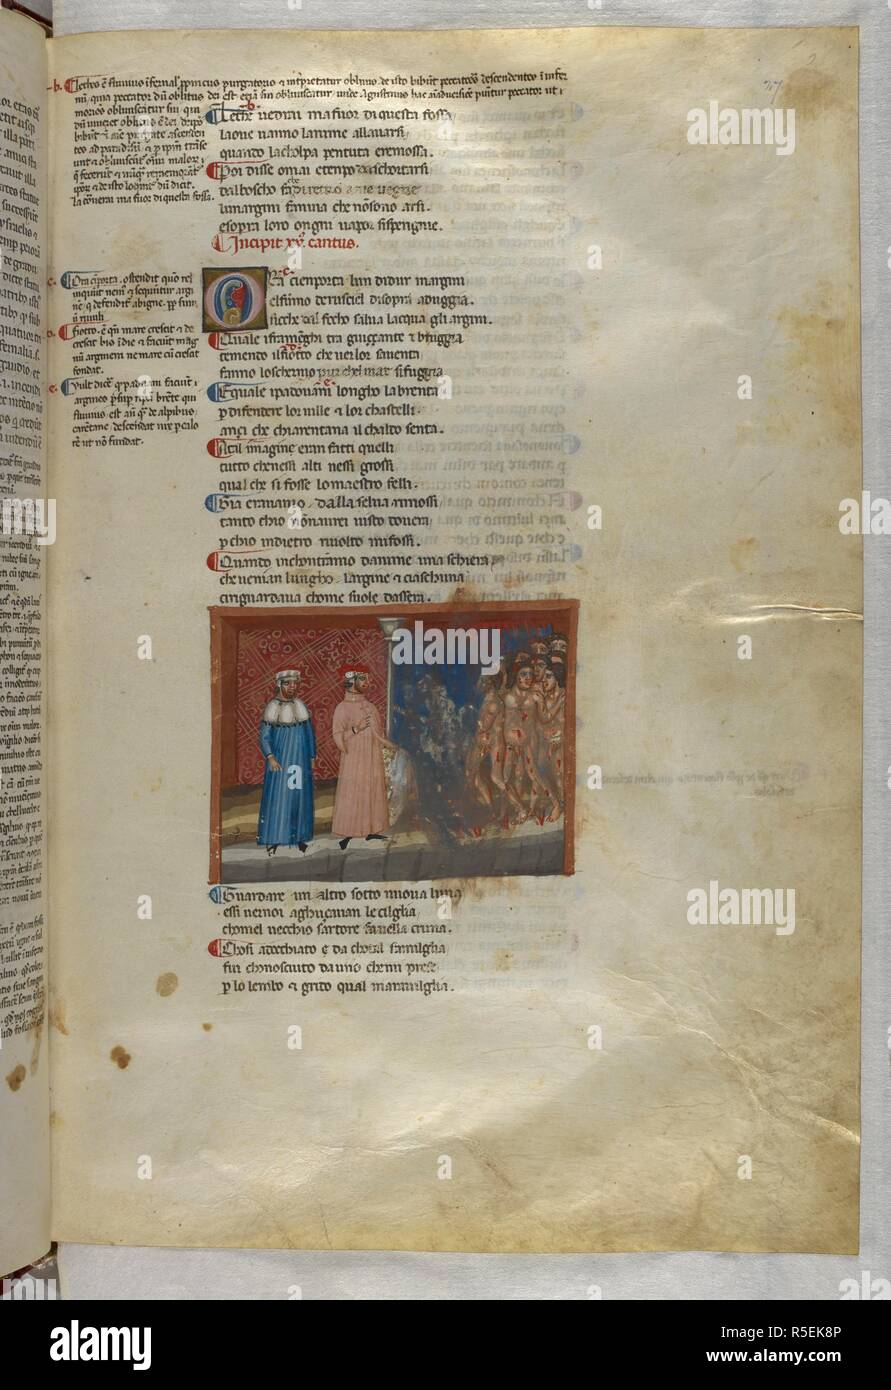 Inferno: Brunetto Latini (partially erased) and the Sodomites. Dante Alighieri, Divina Commedia ( The Divine Comedy ), with a commentary in Latin. 1st half of the 14th century. Source: Egerton 943, f.27. Language: Italian, Latin. Stock Photo